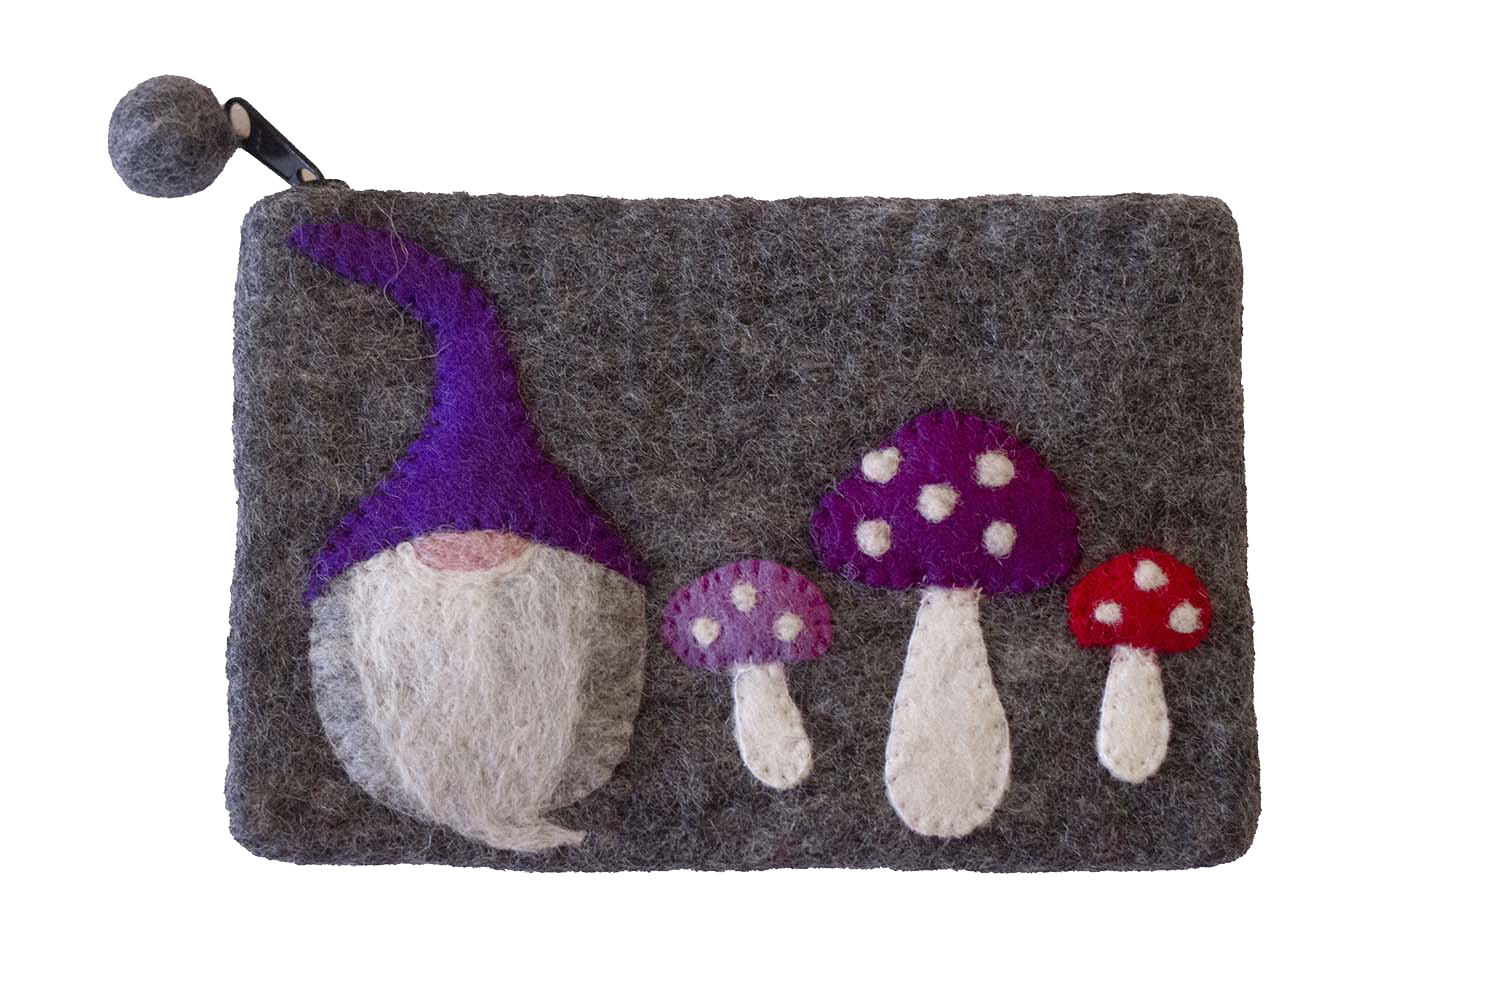 This Global Groove Life, handmade, ethical, fair trade, eco-friendly, sustainable, grey felt zipper coin pouch was created by artisans in Kathmandu Nepal and is adorned with an adorable gnome with mushrooms motif.